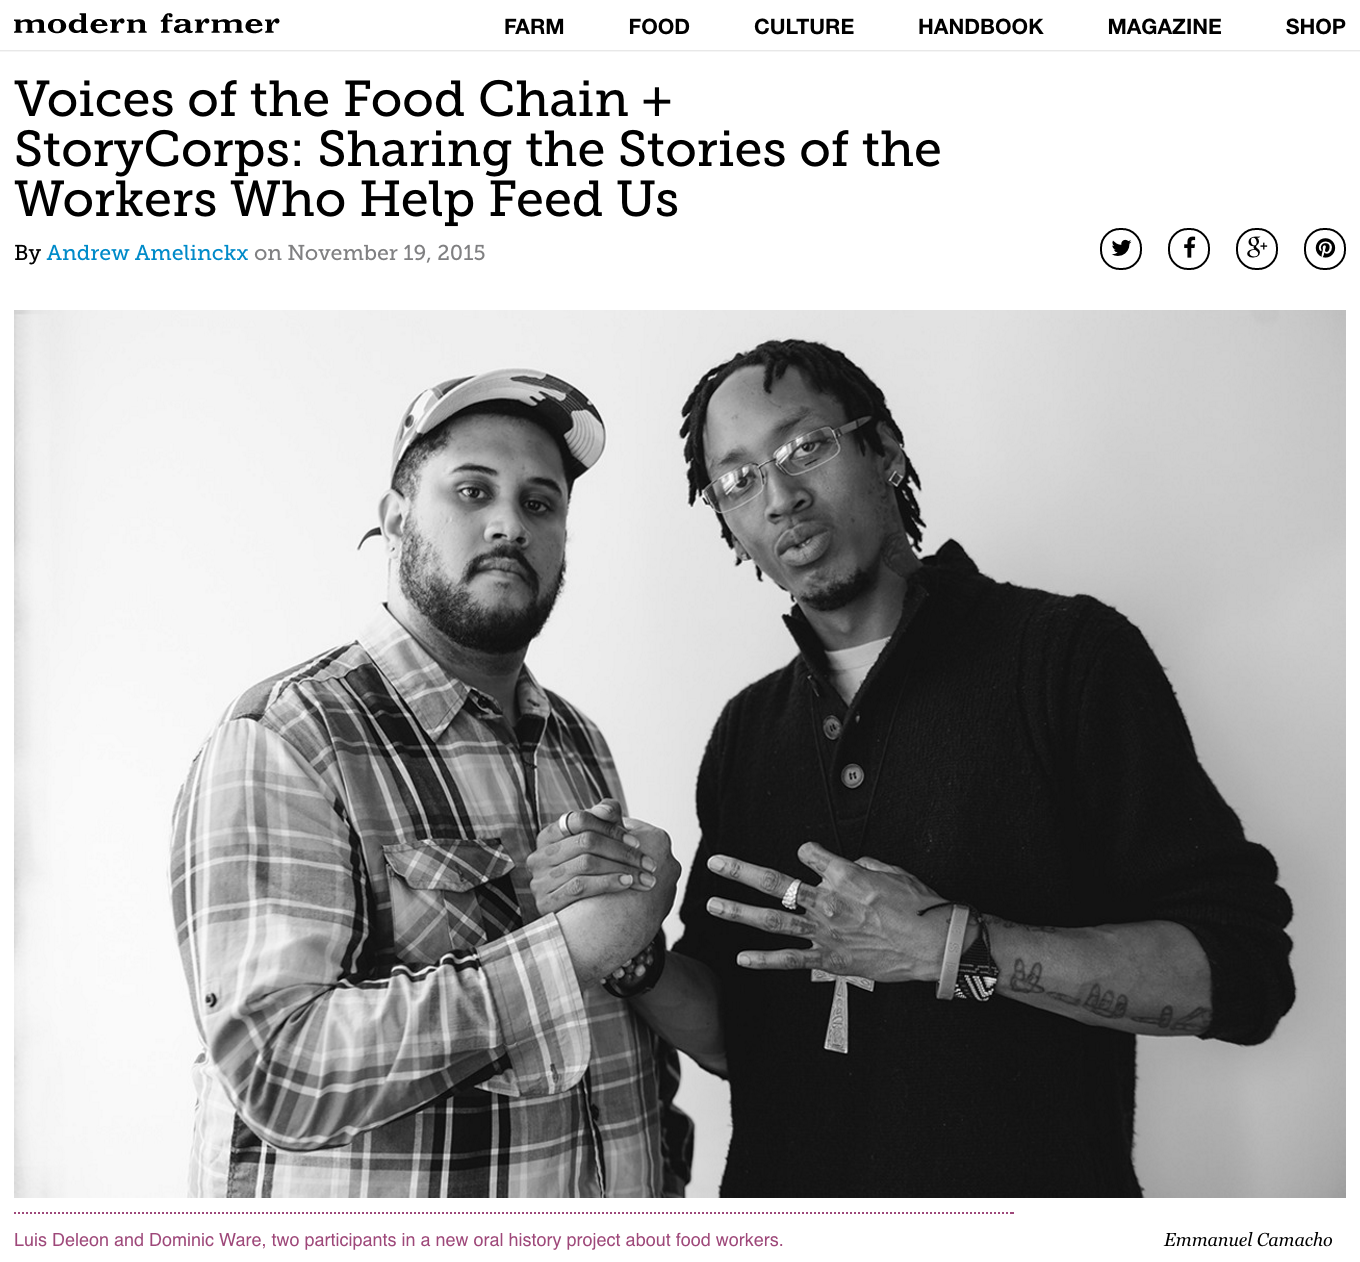 Modern Farmer: Voices of the Food Chain + StoryCorps: Sharing the Stories of the Workers Who Help Feed Us